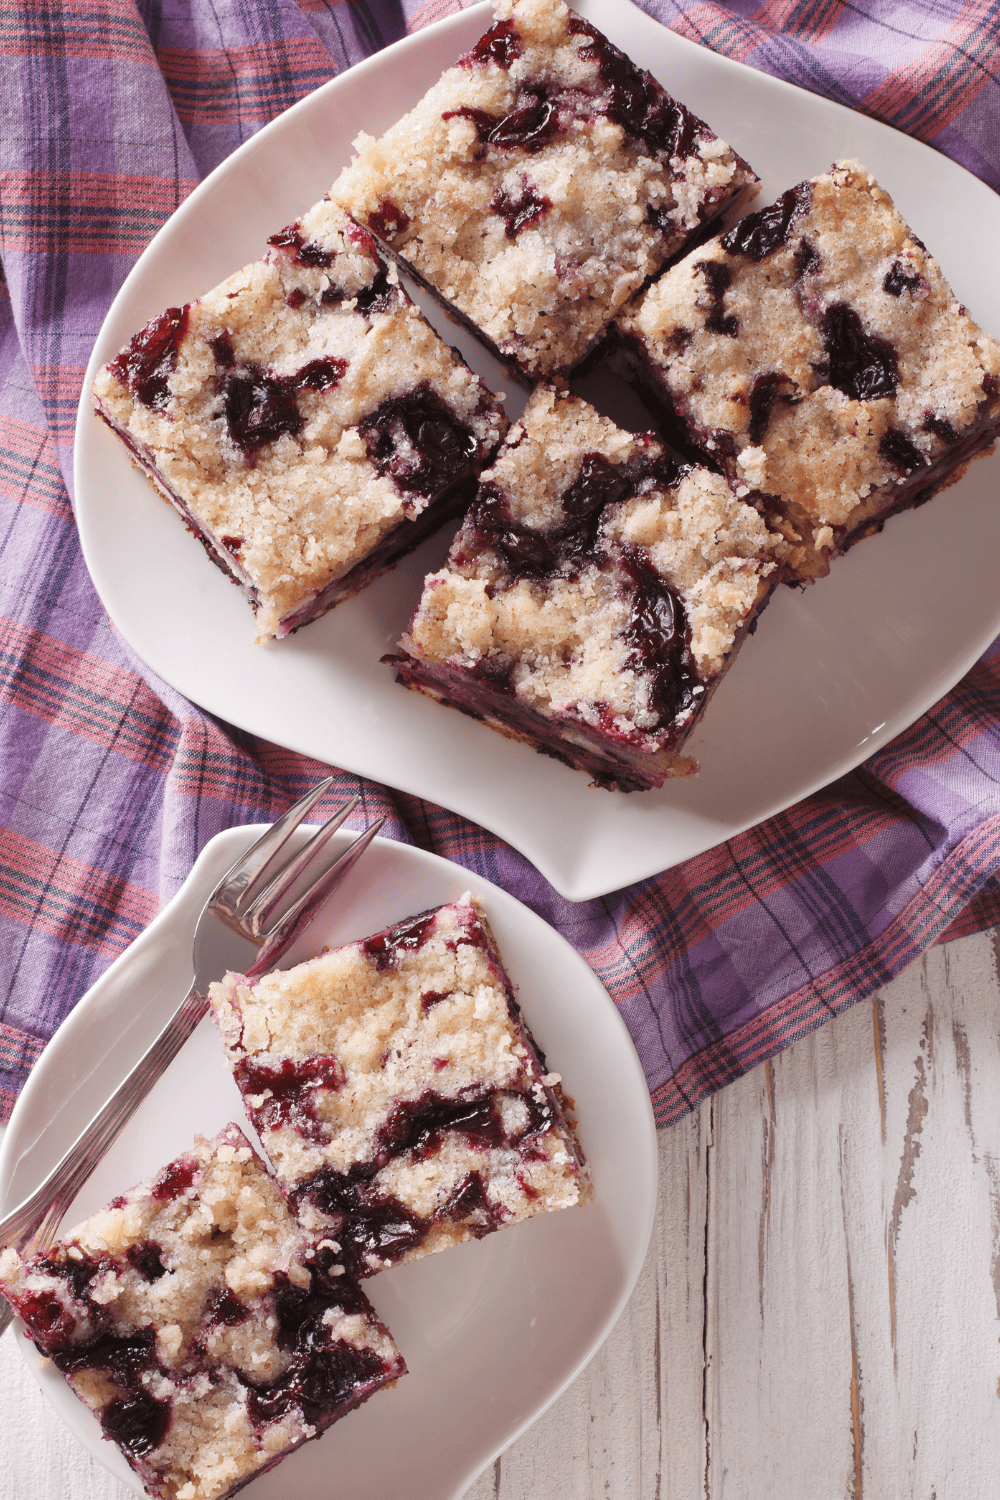 Slices of blueberry buckle on two plates with a fork